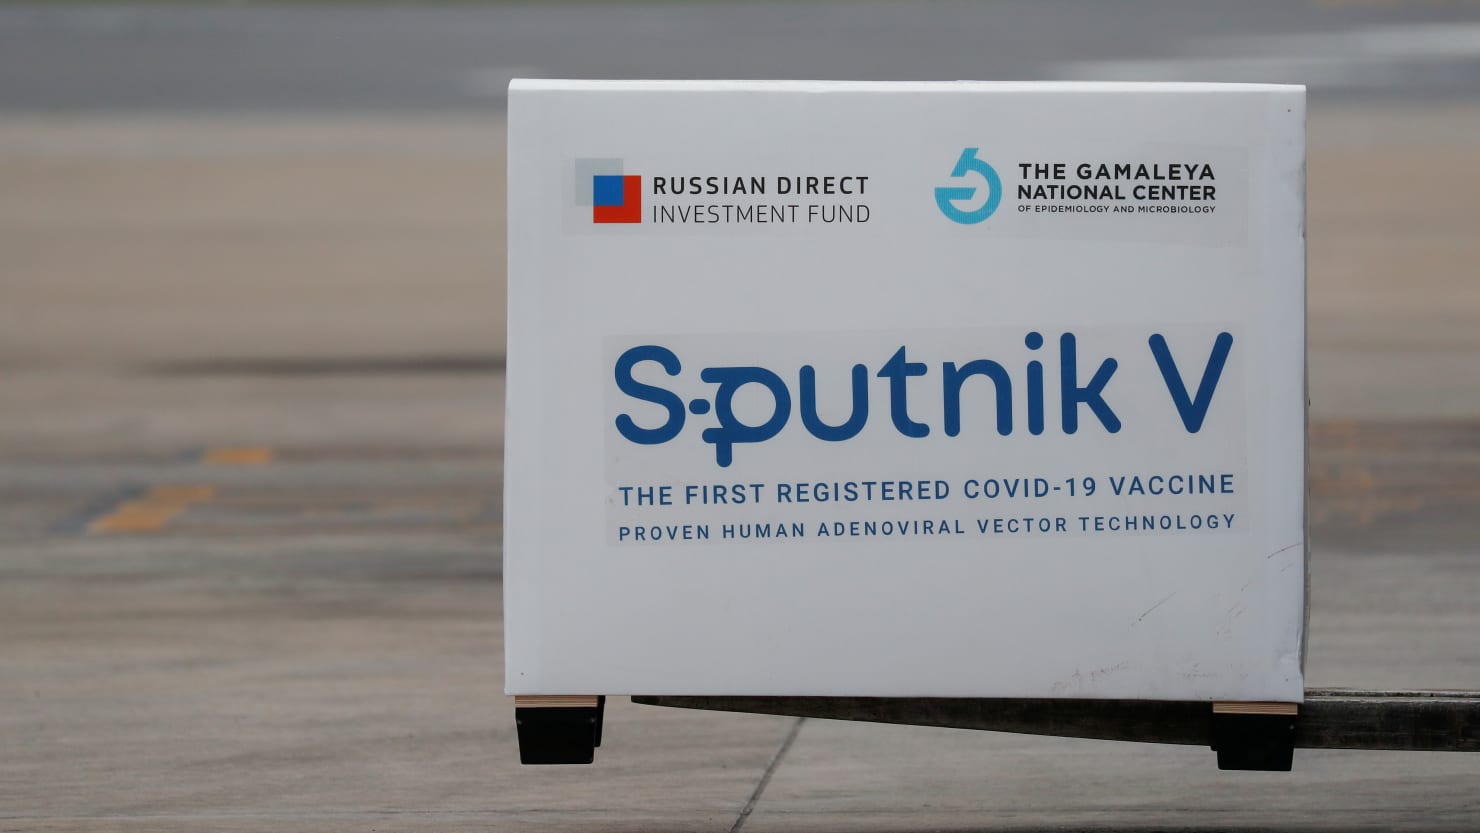 Russian Sputnik V vaccine is as good as Western vaccines, study finds